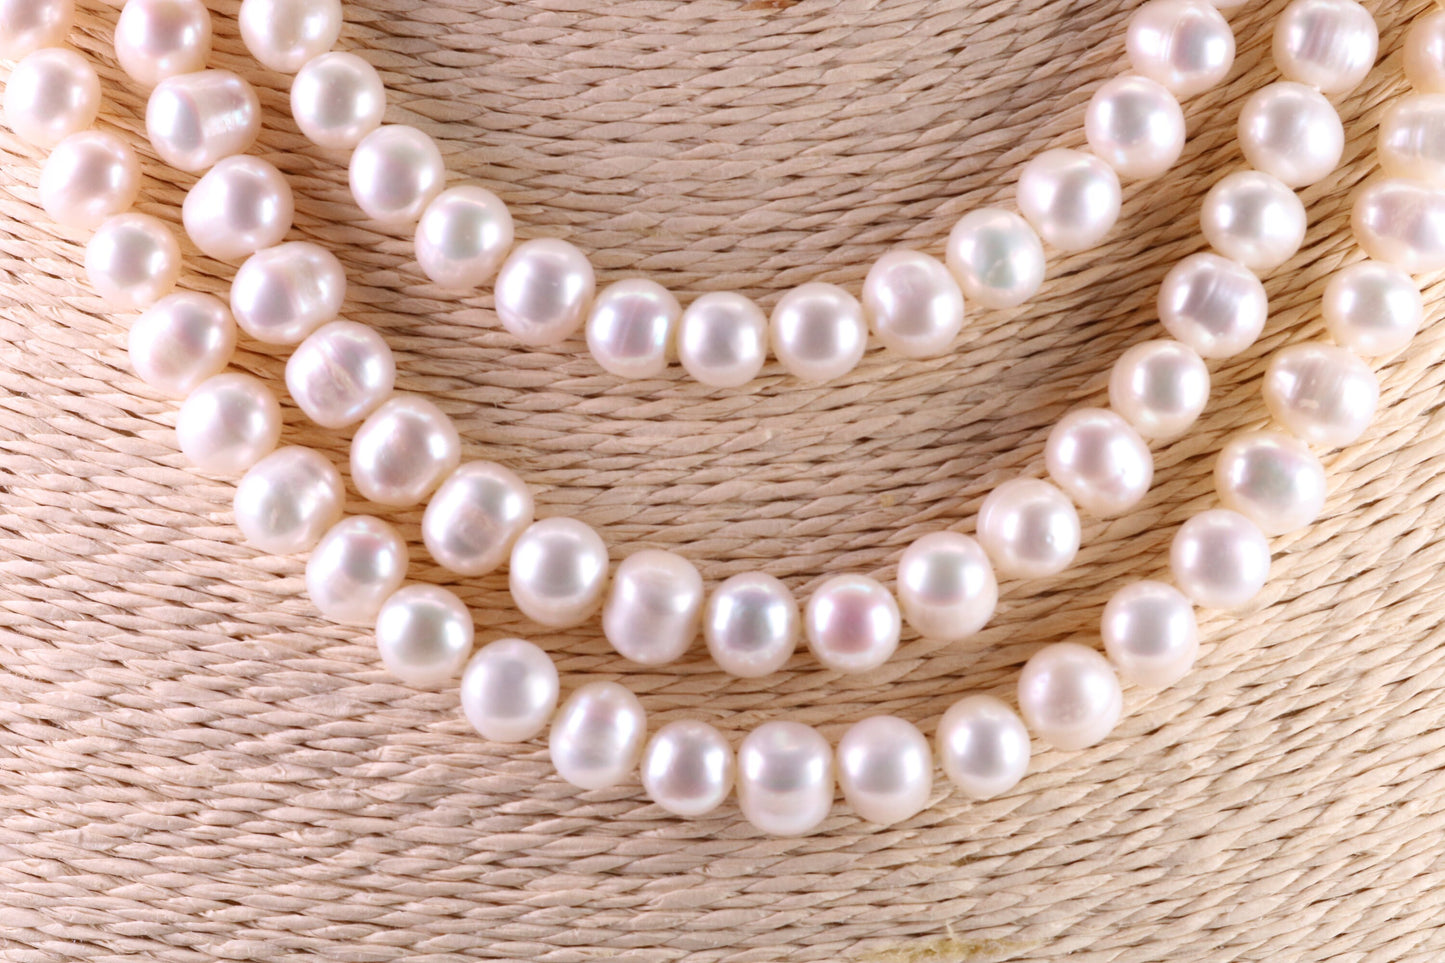 Three Strand Natural 7 mm Round Pearl Necklace set in Silver, Three Strands Measures 16, 18 and 20 inches Long